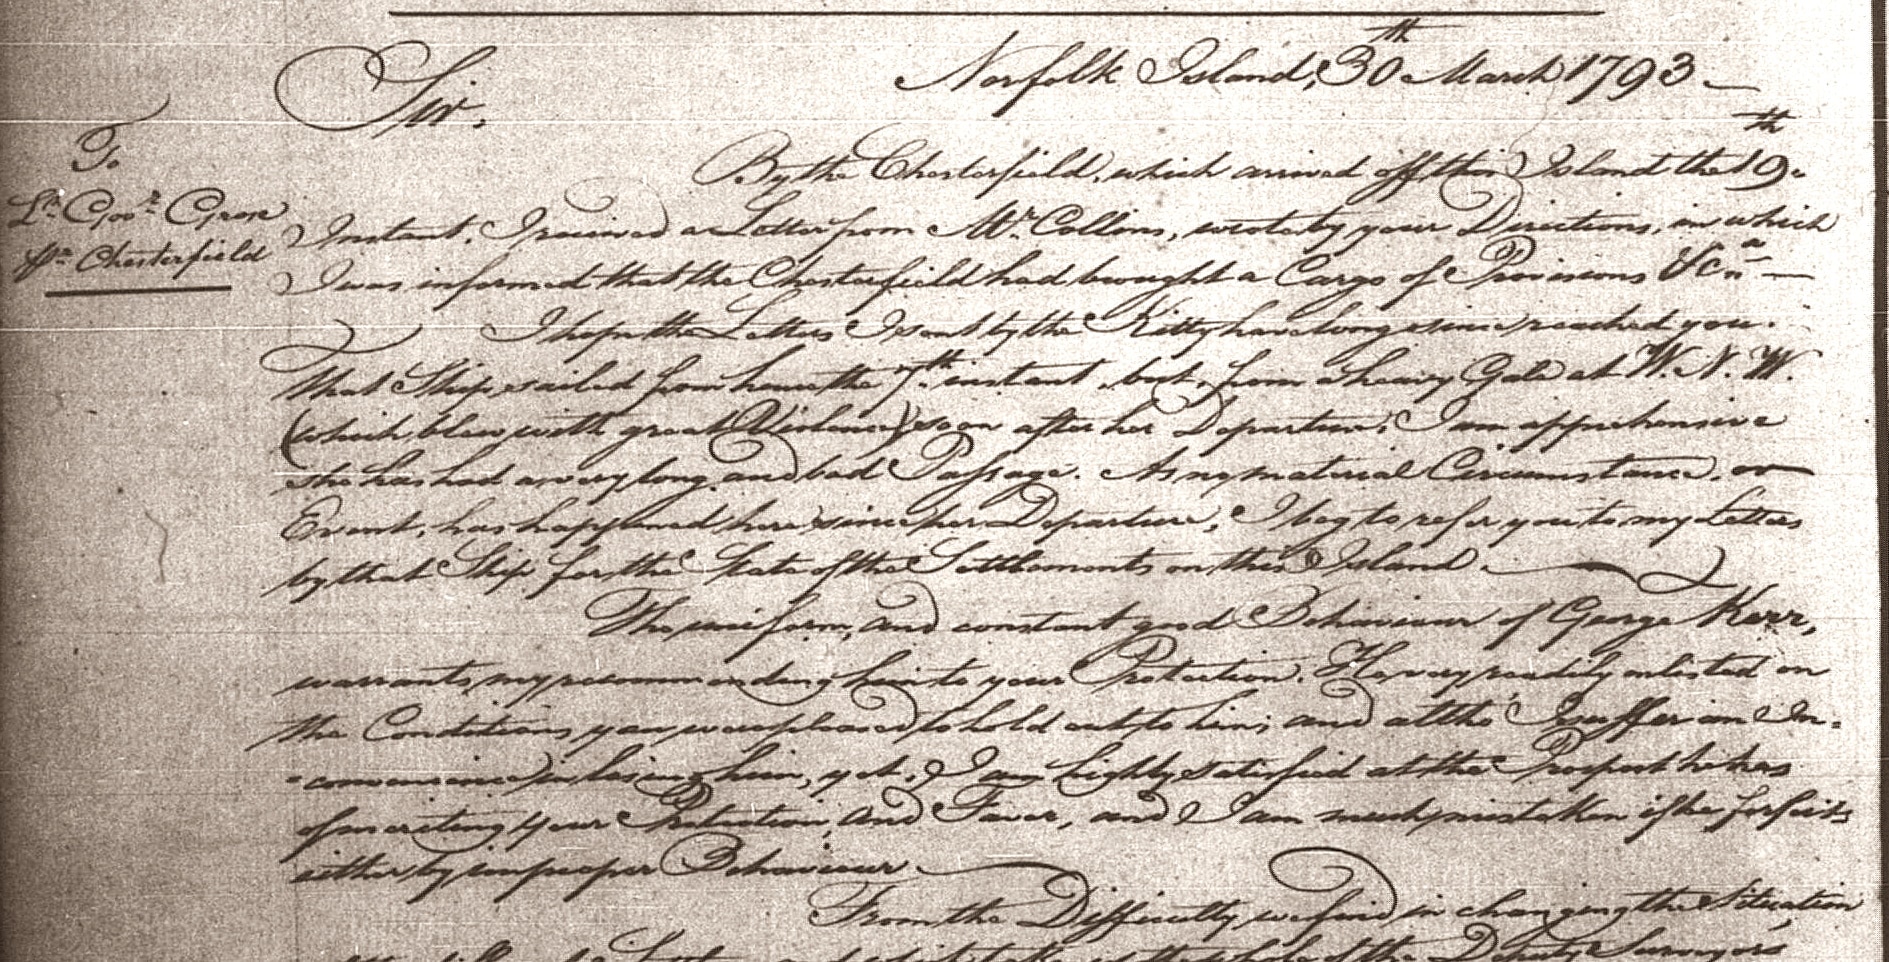 Letter from Philip Gidley King, Norfolk Island, 30 March 1793, to Francis Grose, Sydney (detail)